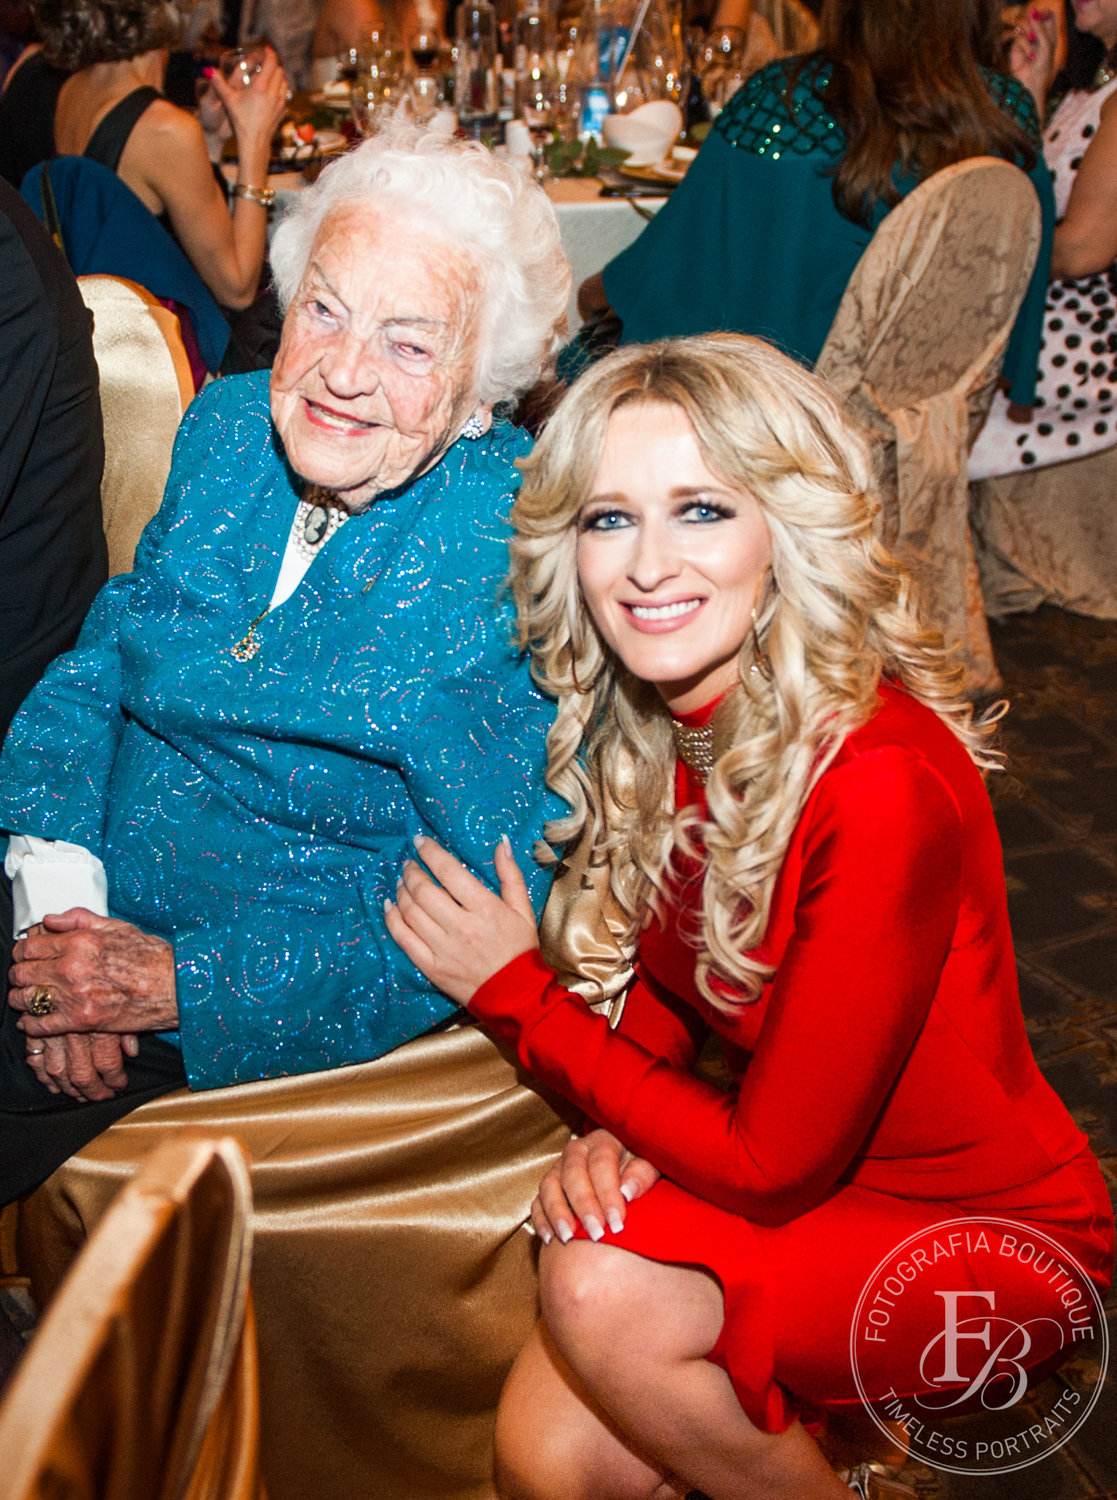 Hazel McCallion and Maggie Habieda of Fotografia Boutique at MARTYs 10 May 2018 image from Maggie Habieda Email Fotografia Boutique infoatfotografiaboutique.ca 29May2018 2:36pm